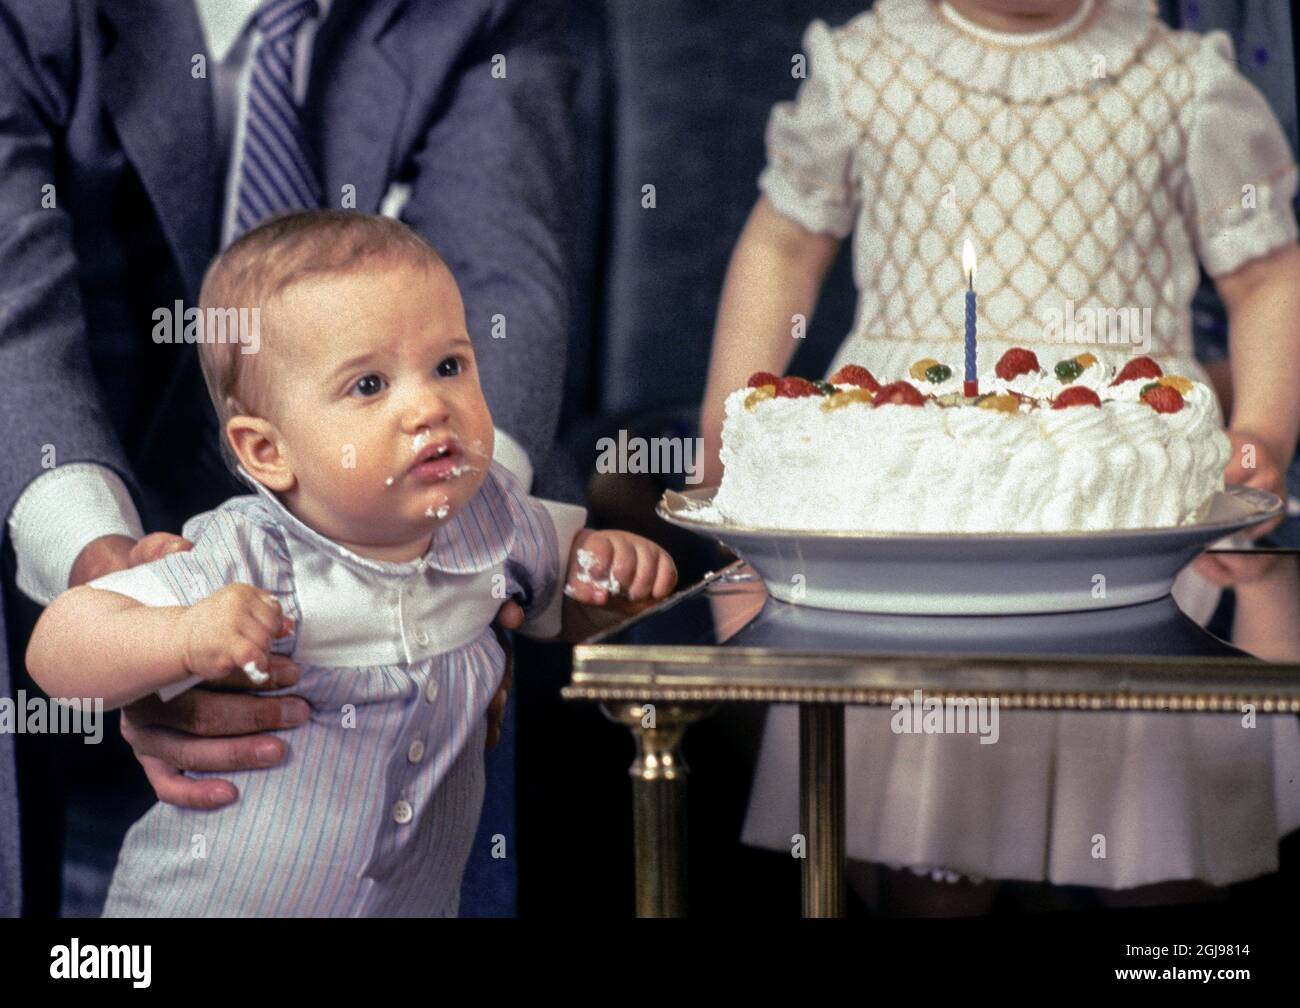 ARKIV STOCKHOLM 1980-04-30 Prince Carl Philip with parts of this birthday cake in his face during a photo opp before the Prince`s first birthday at the Royal palace in Stockholm,Sweden, April 30, 1980 Foto: Jan Collsioo / TT / Kod: 1001  Stock Photo